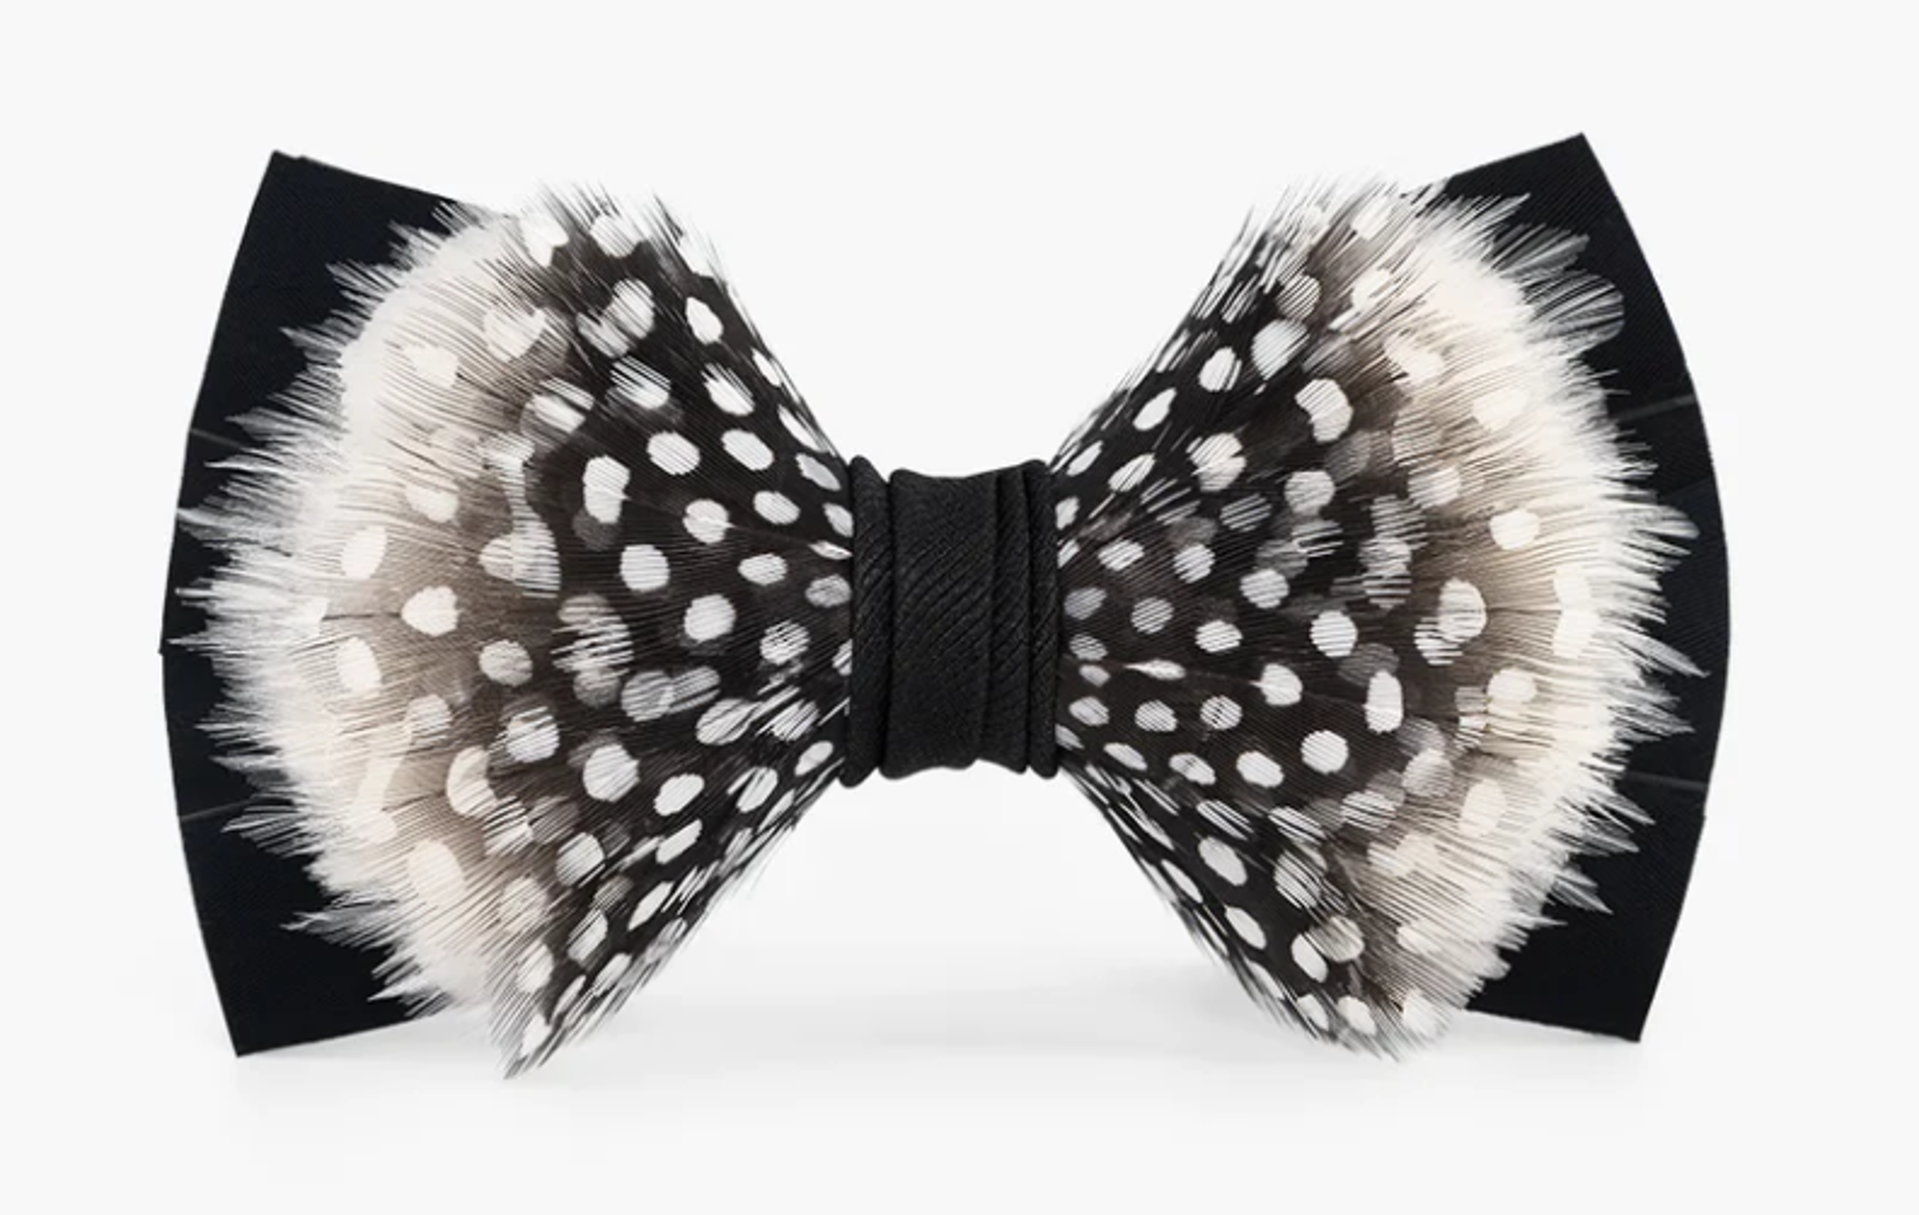 Drifter Bow Tie - Goose, Rooster, Guinea Feathers by Brackish